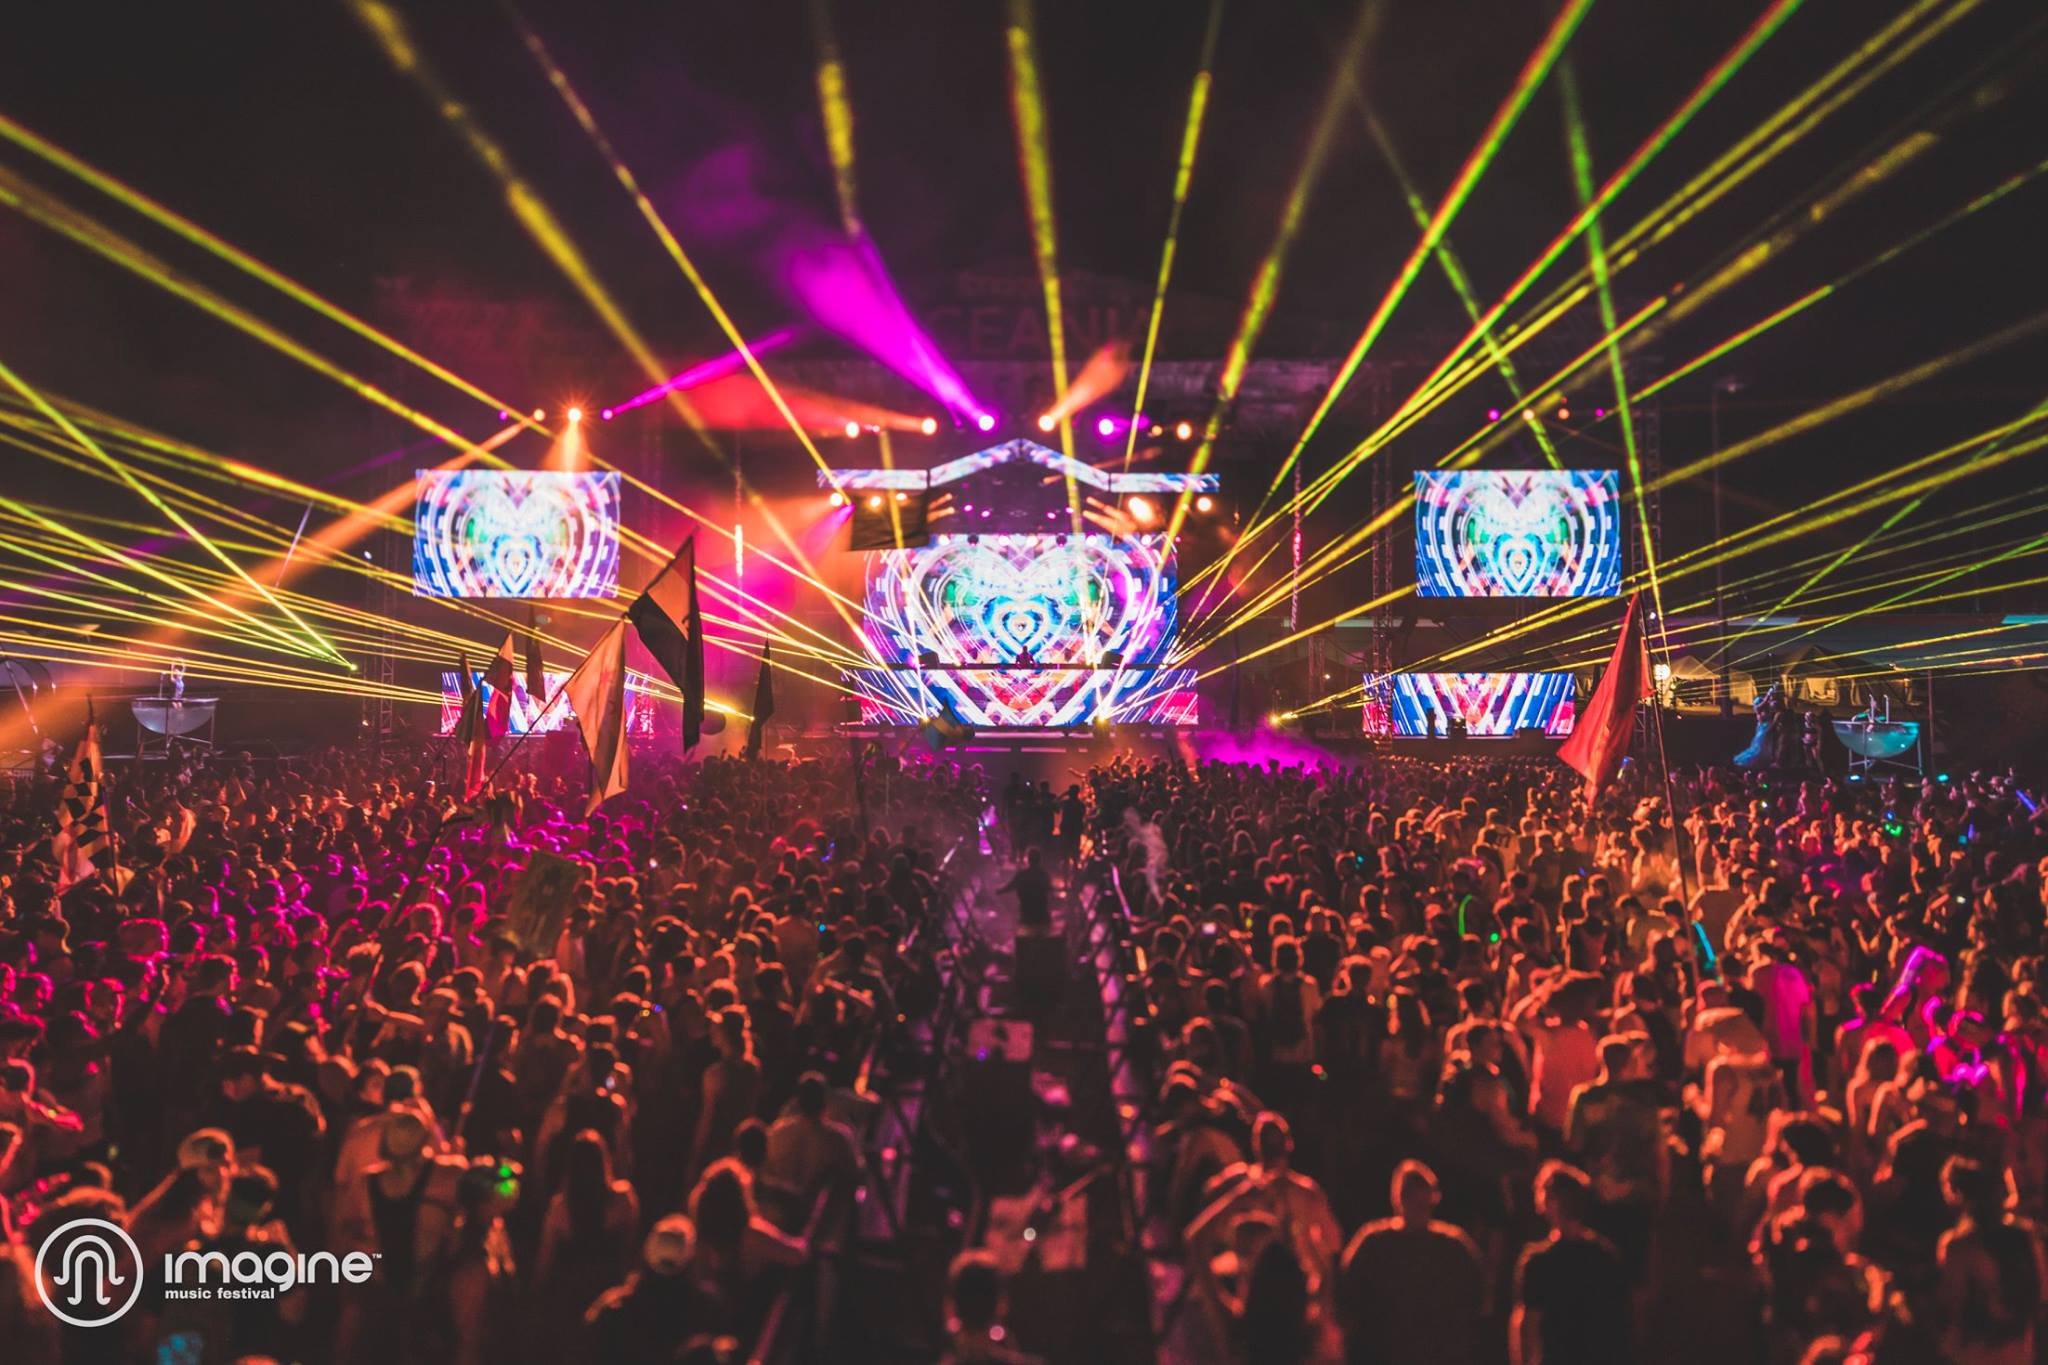 Imagine Festival Celebrates 5th Anniversary in Style with Epic Phase 1